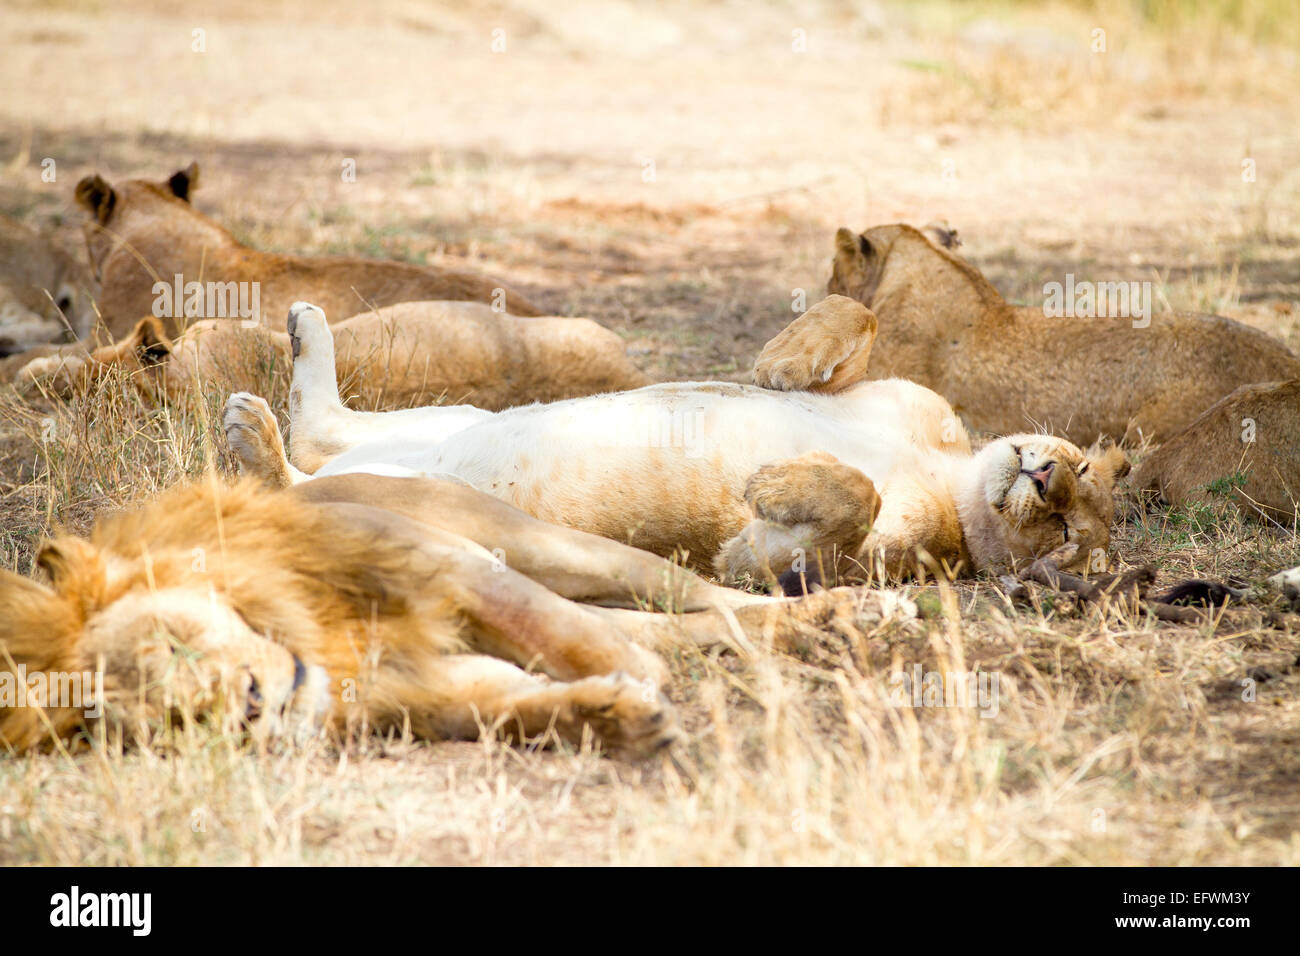 Cute lion sleeps on the back with paws in air Stock Photo